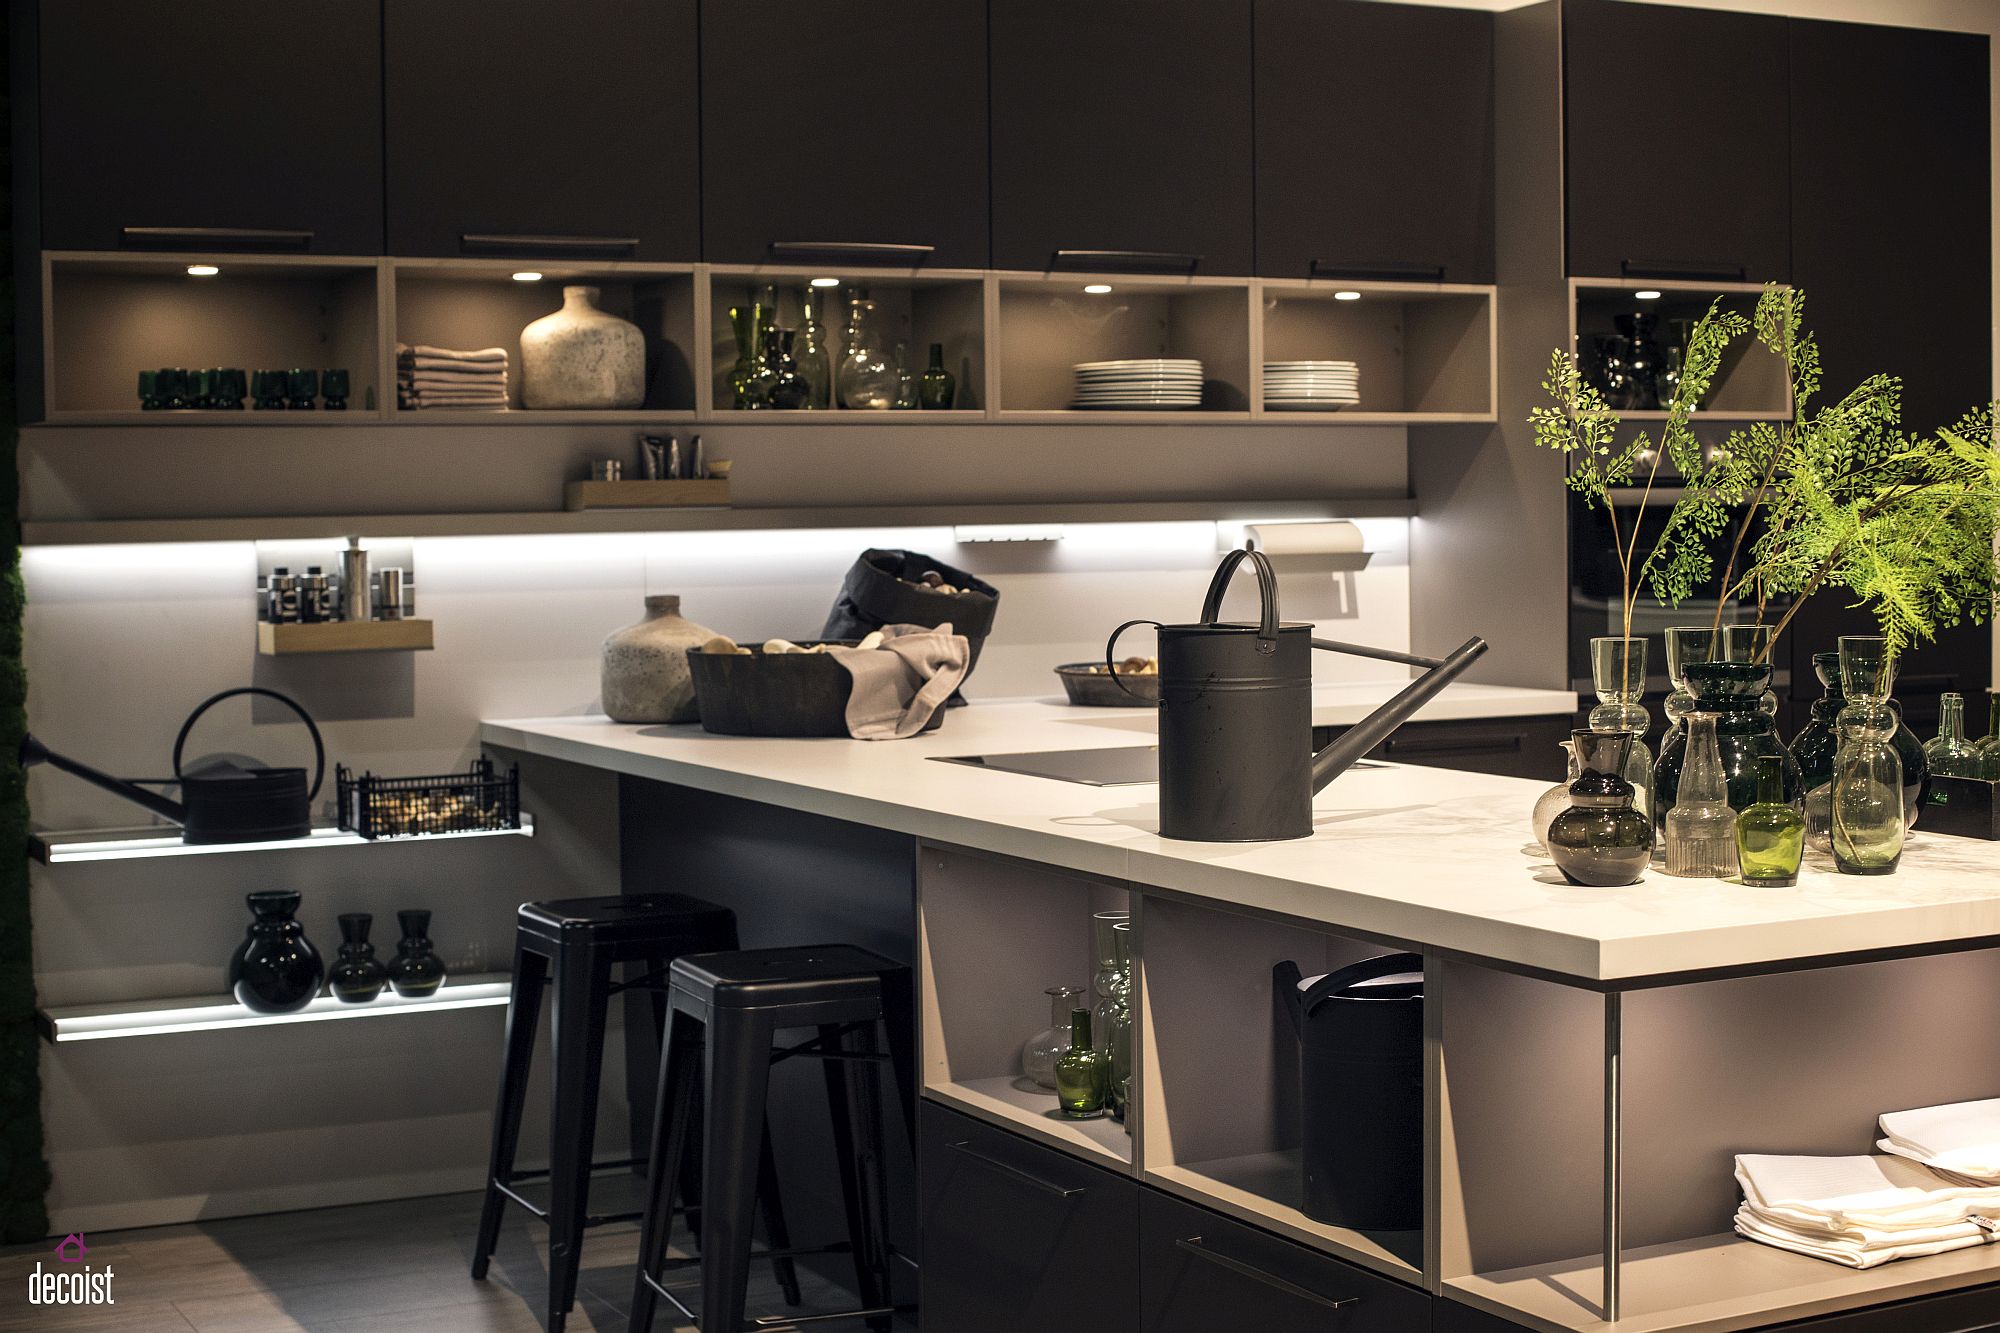 Under-cabint LED strip lights are a popular trend in contempoarry kitchens